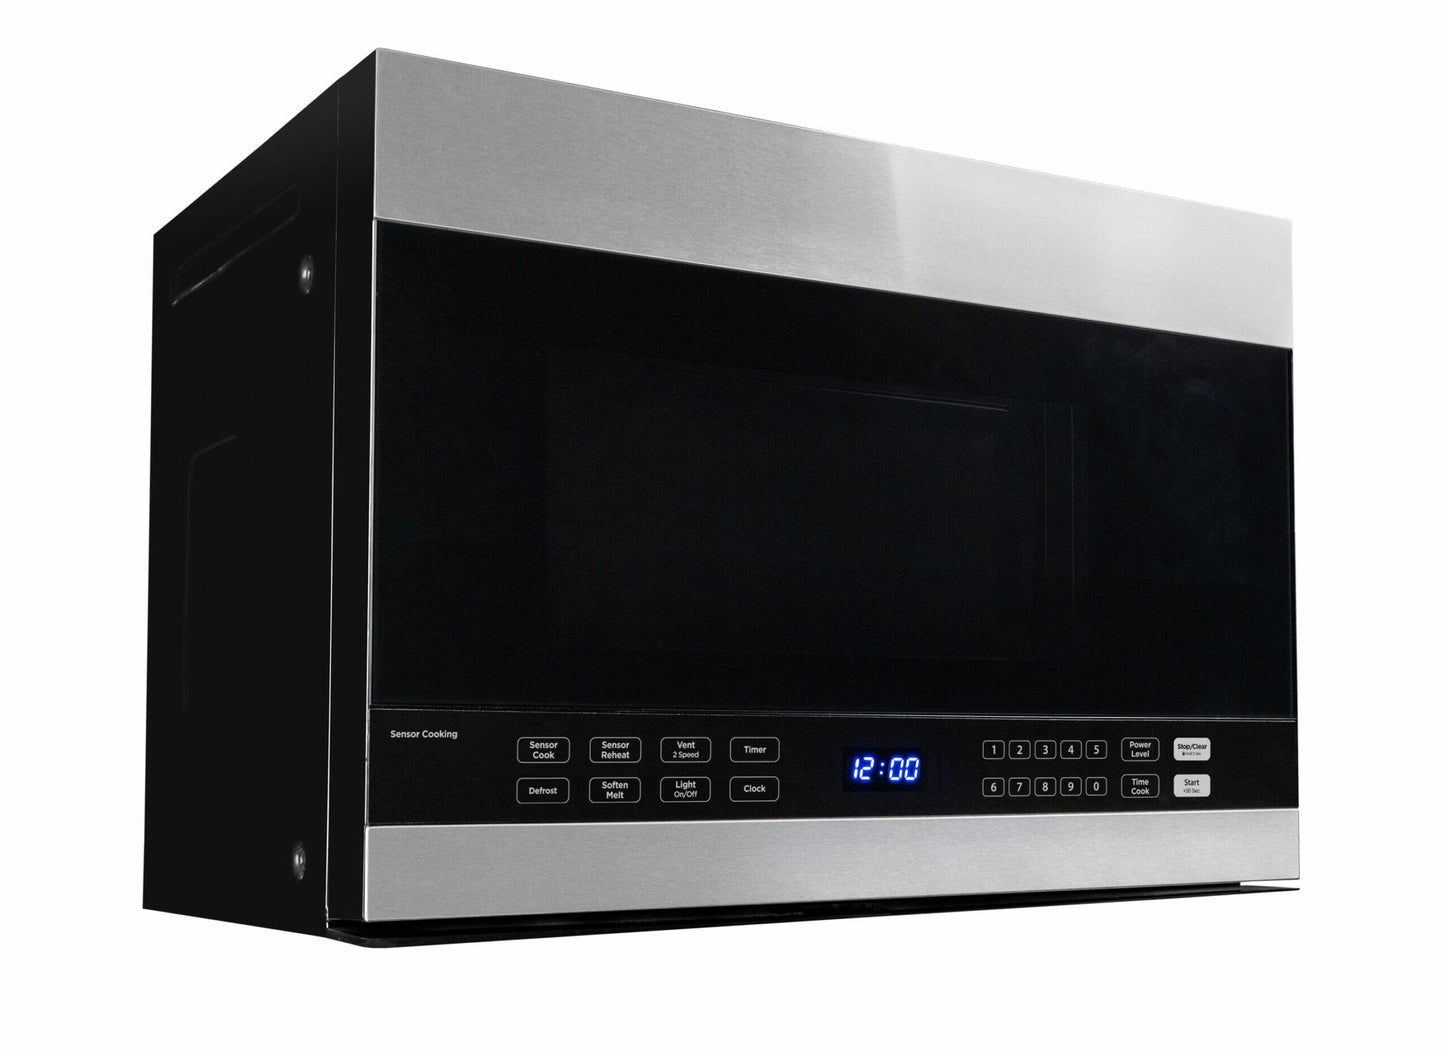 Danby DOM014401G1 Danby 1.4 Cu. Ft. Over The Range Microwave Oven In Stainless Steel